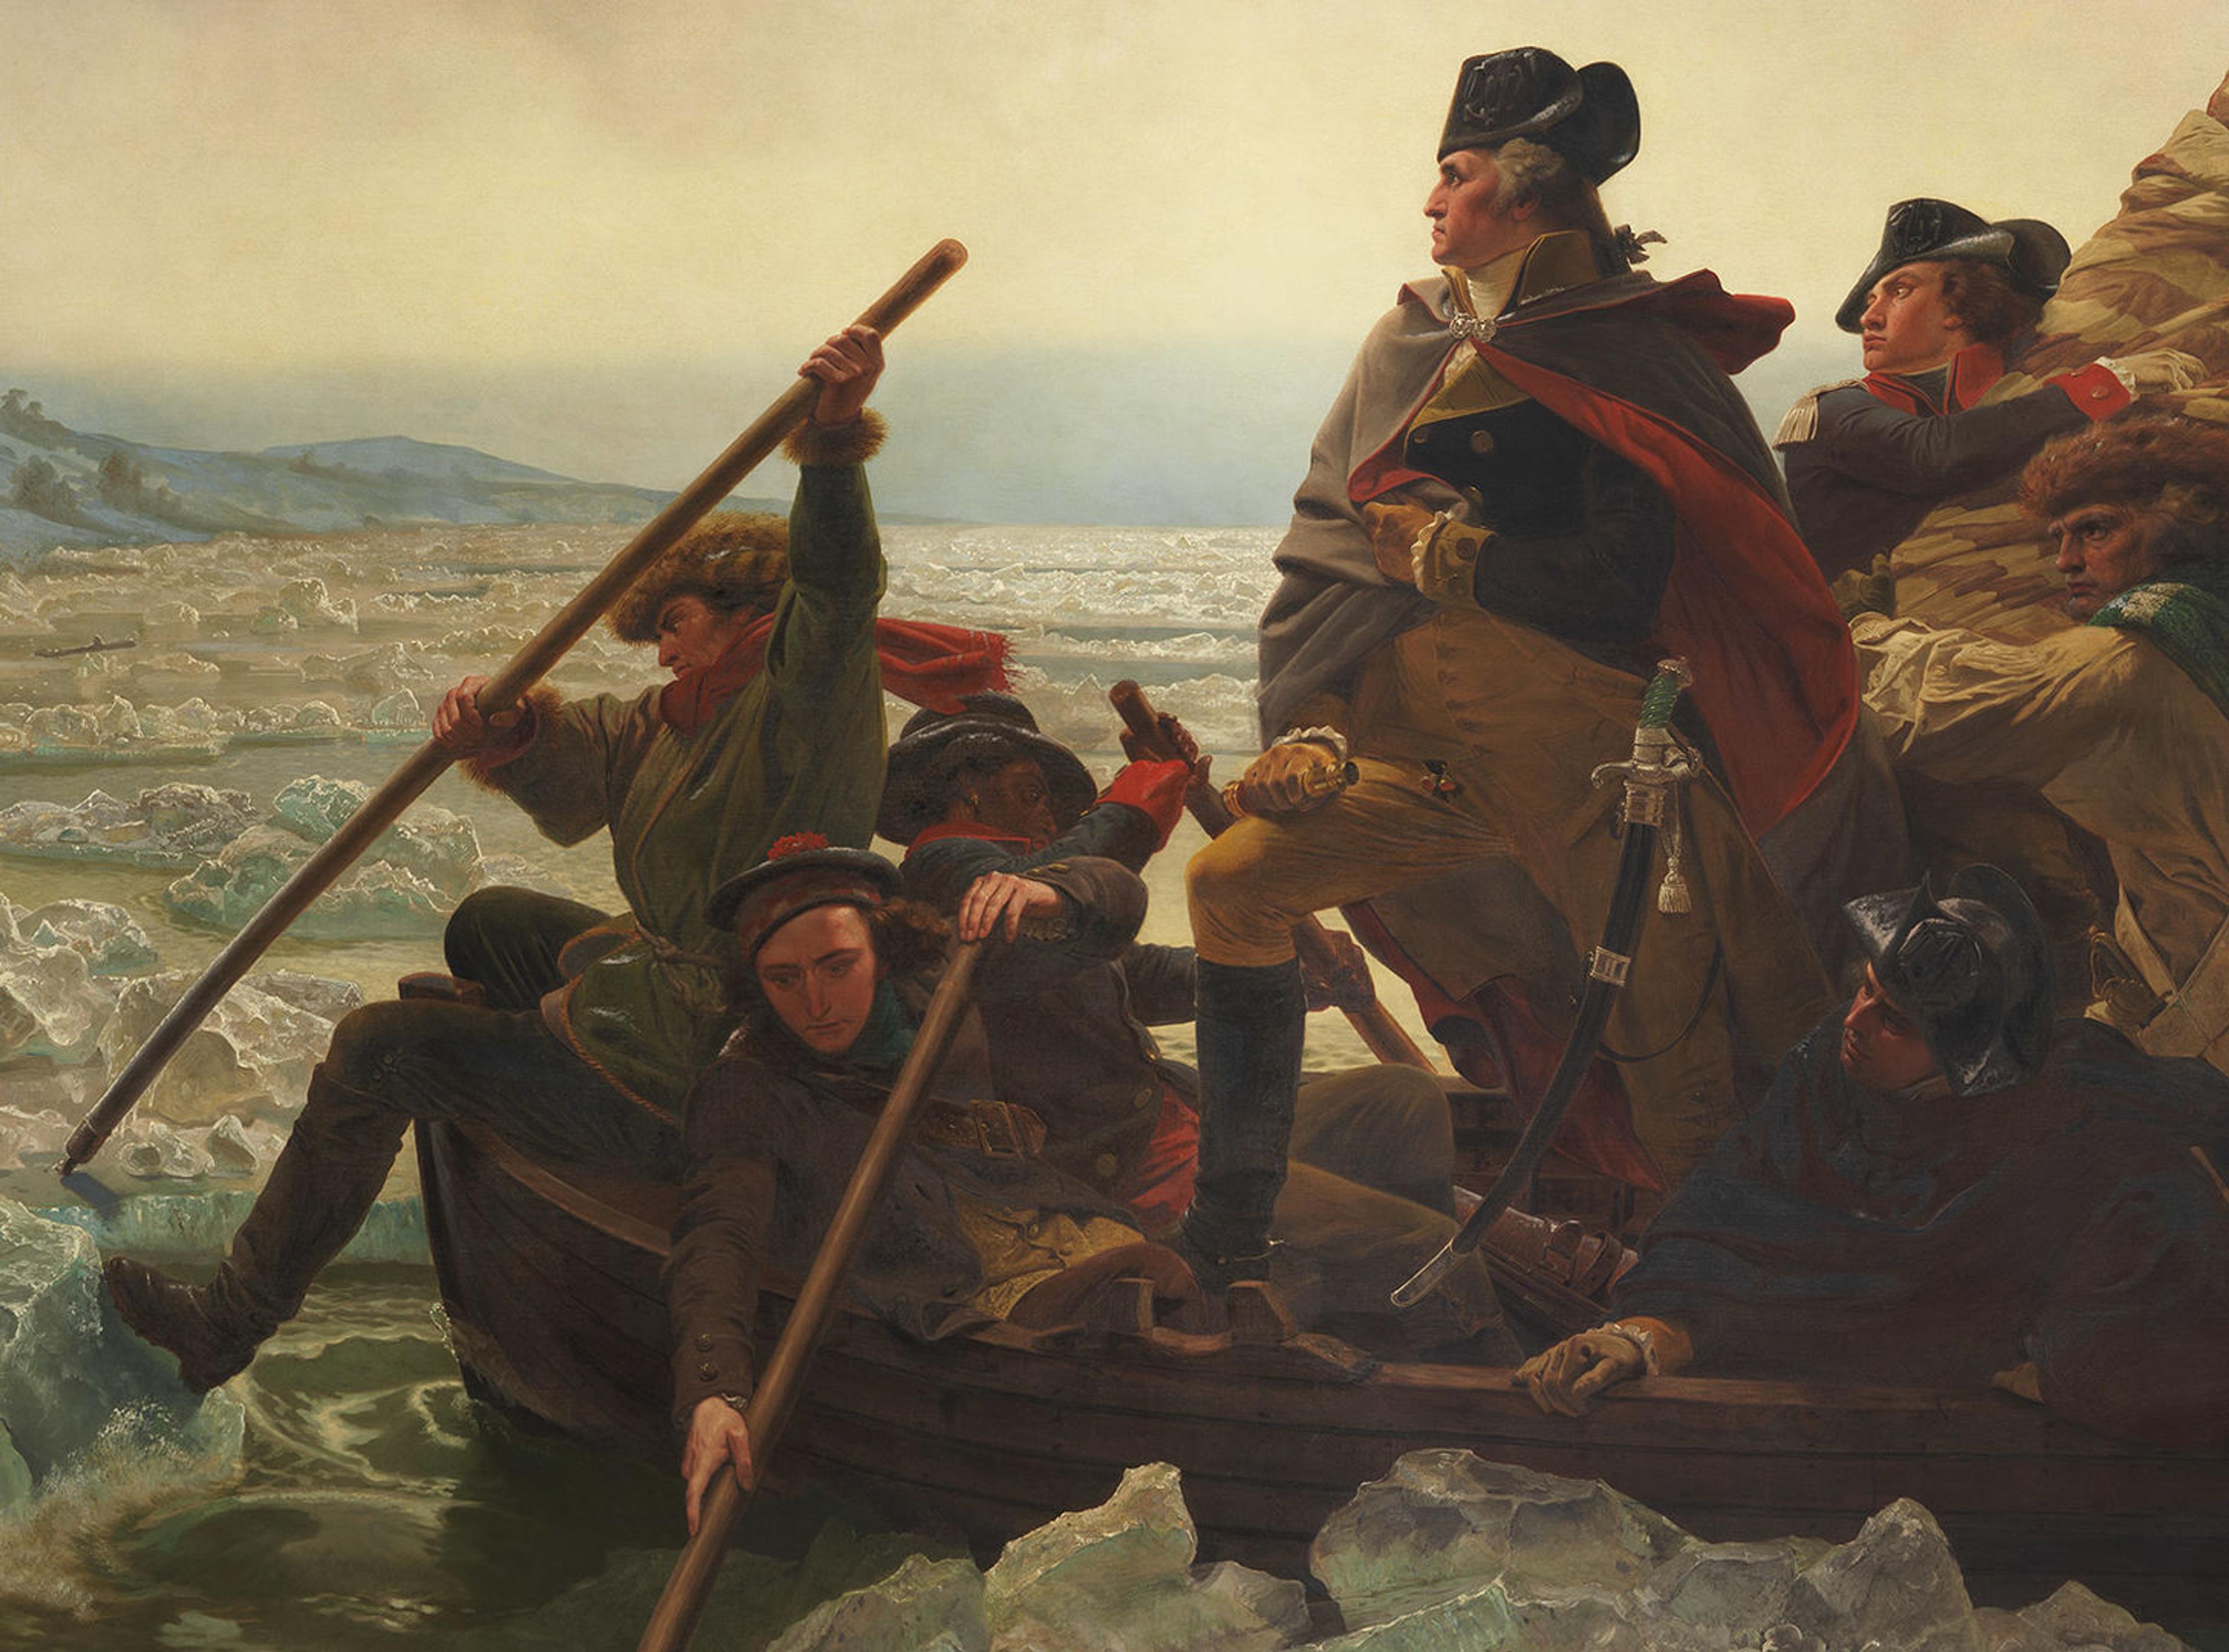 A closer view of the men in the boat in the painting Washington Crossing the Delaware. Prince Whipple, the black soldier wearing red cuff links, rows behind George Washington, who stands.